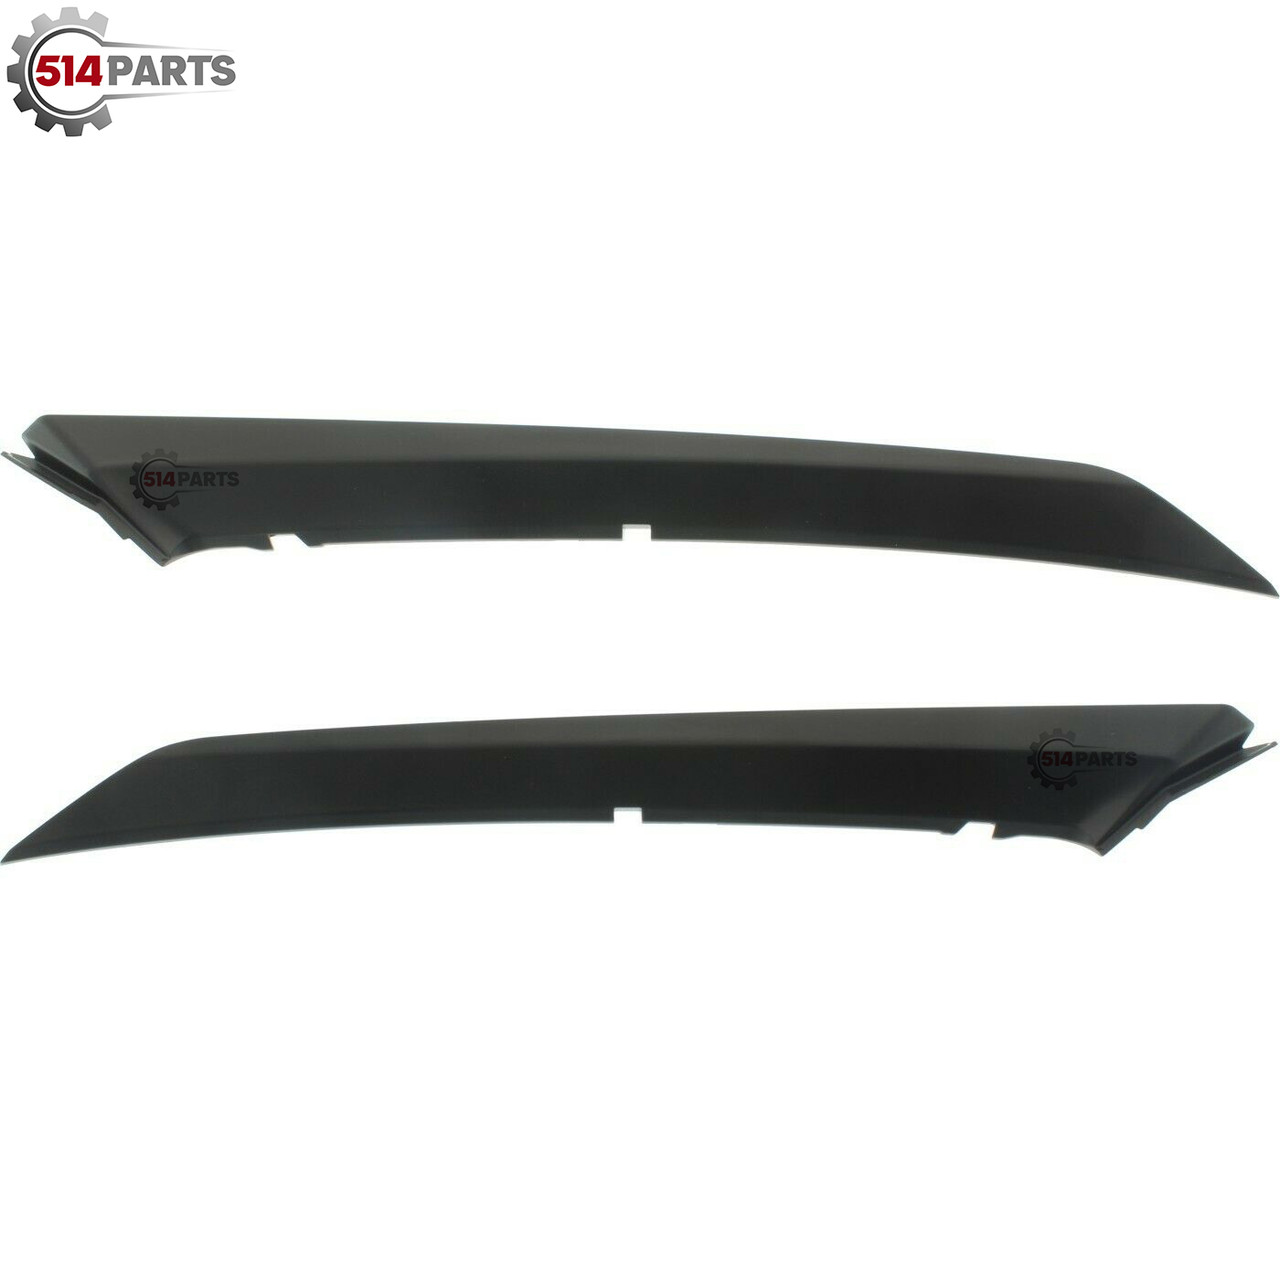 2018 - 2019 TOYOTA CAMRY and CAMRY HYBRID SE/XSE TEXTURED BLACK UPPER BUMPER MOULDING - MOULURE DE PARE-CHOC SUPERIEUR